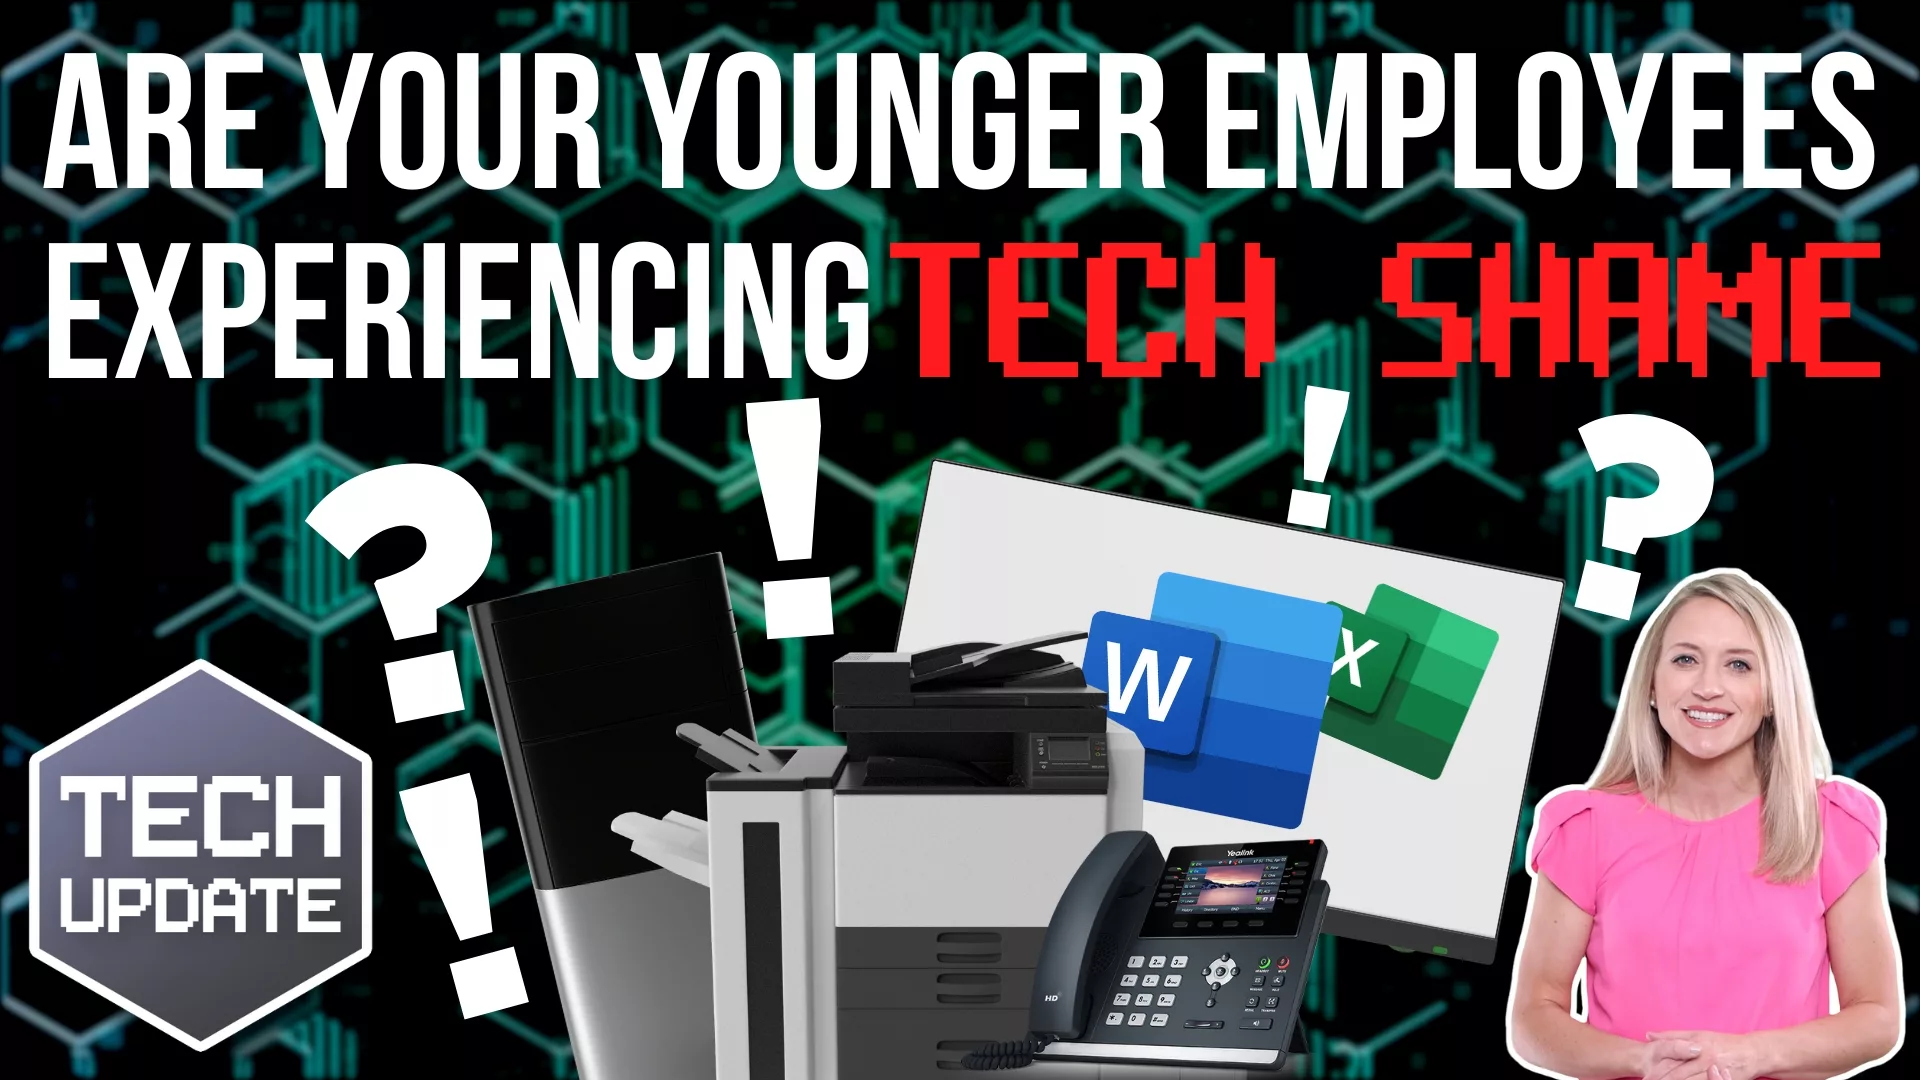 Are your younger employees experiencing tech shame? tech update.